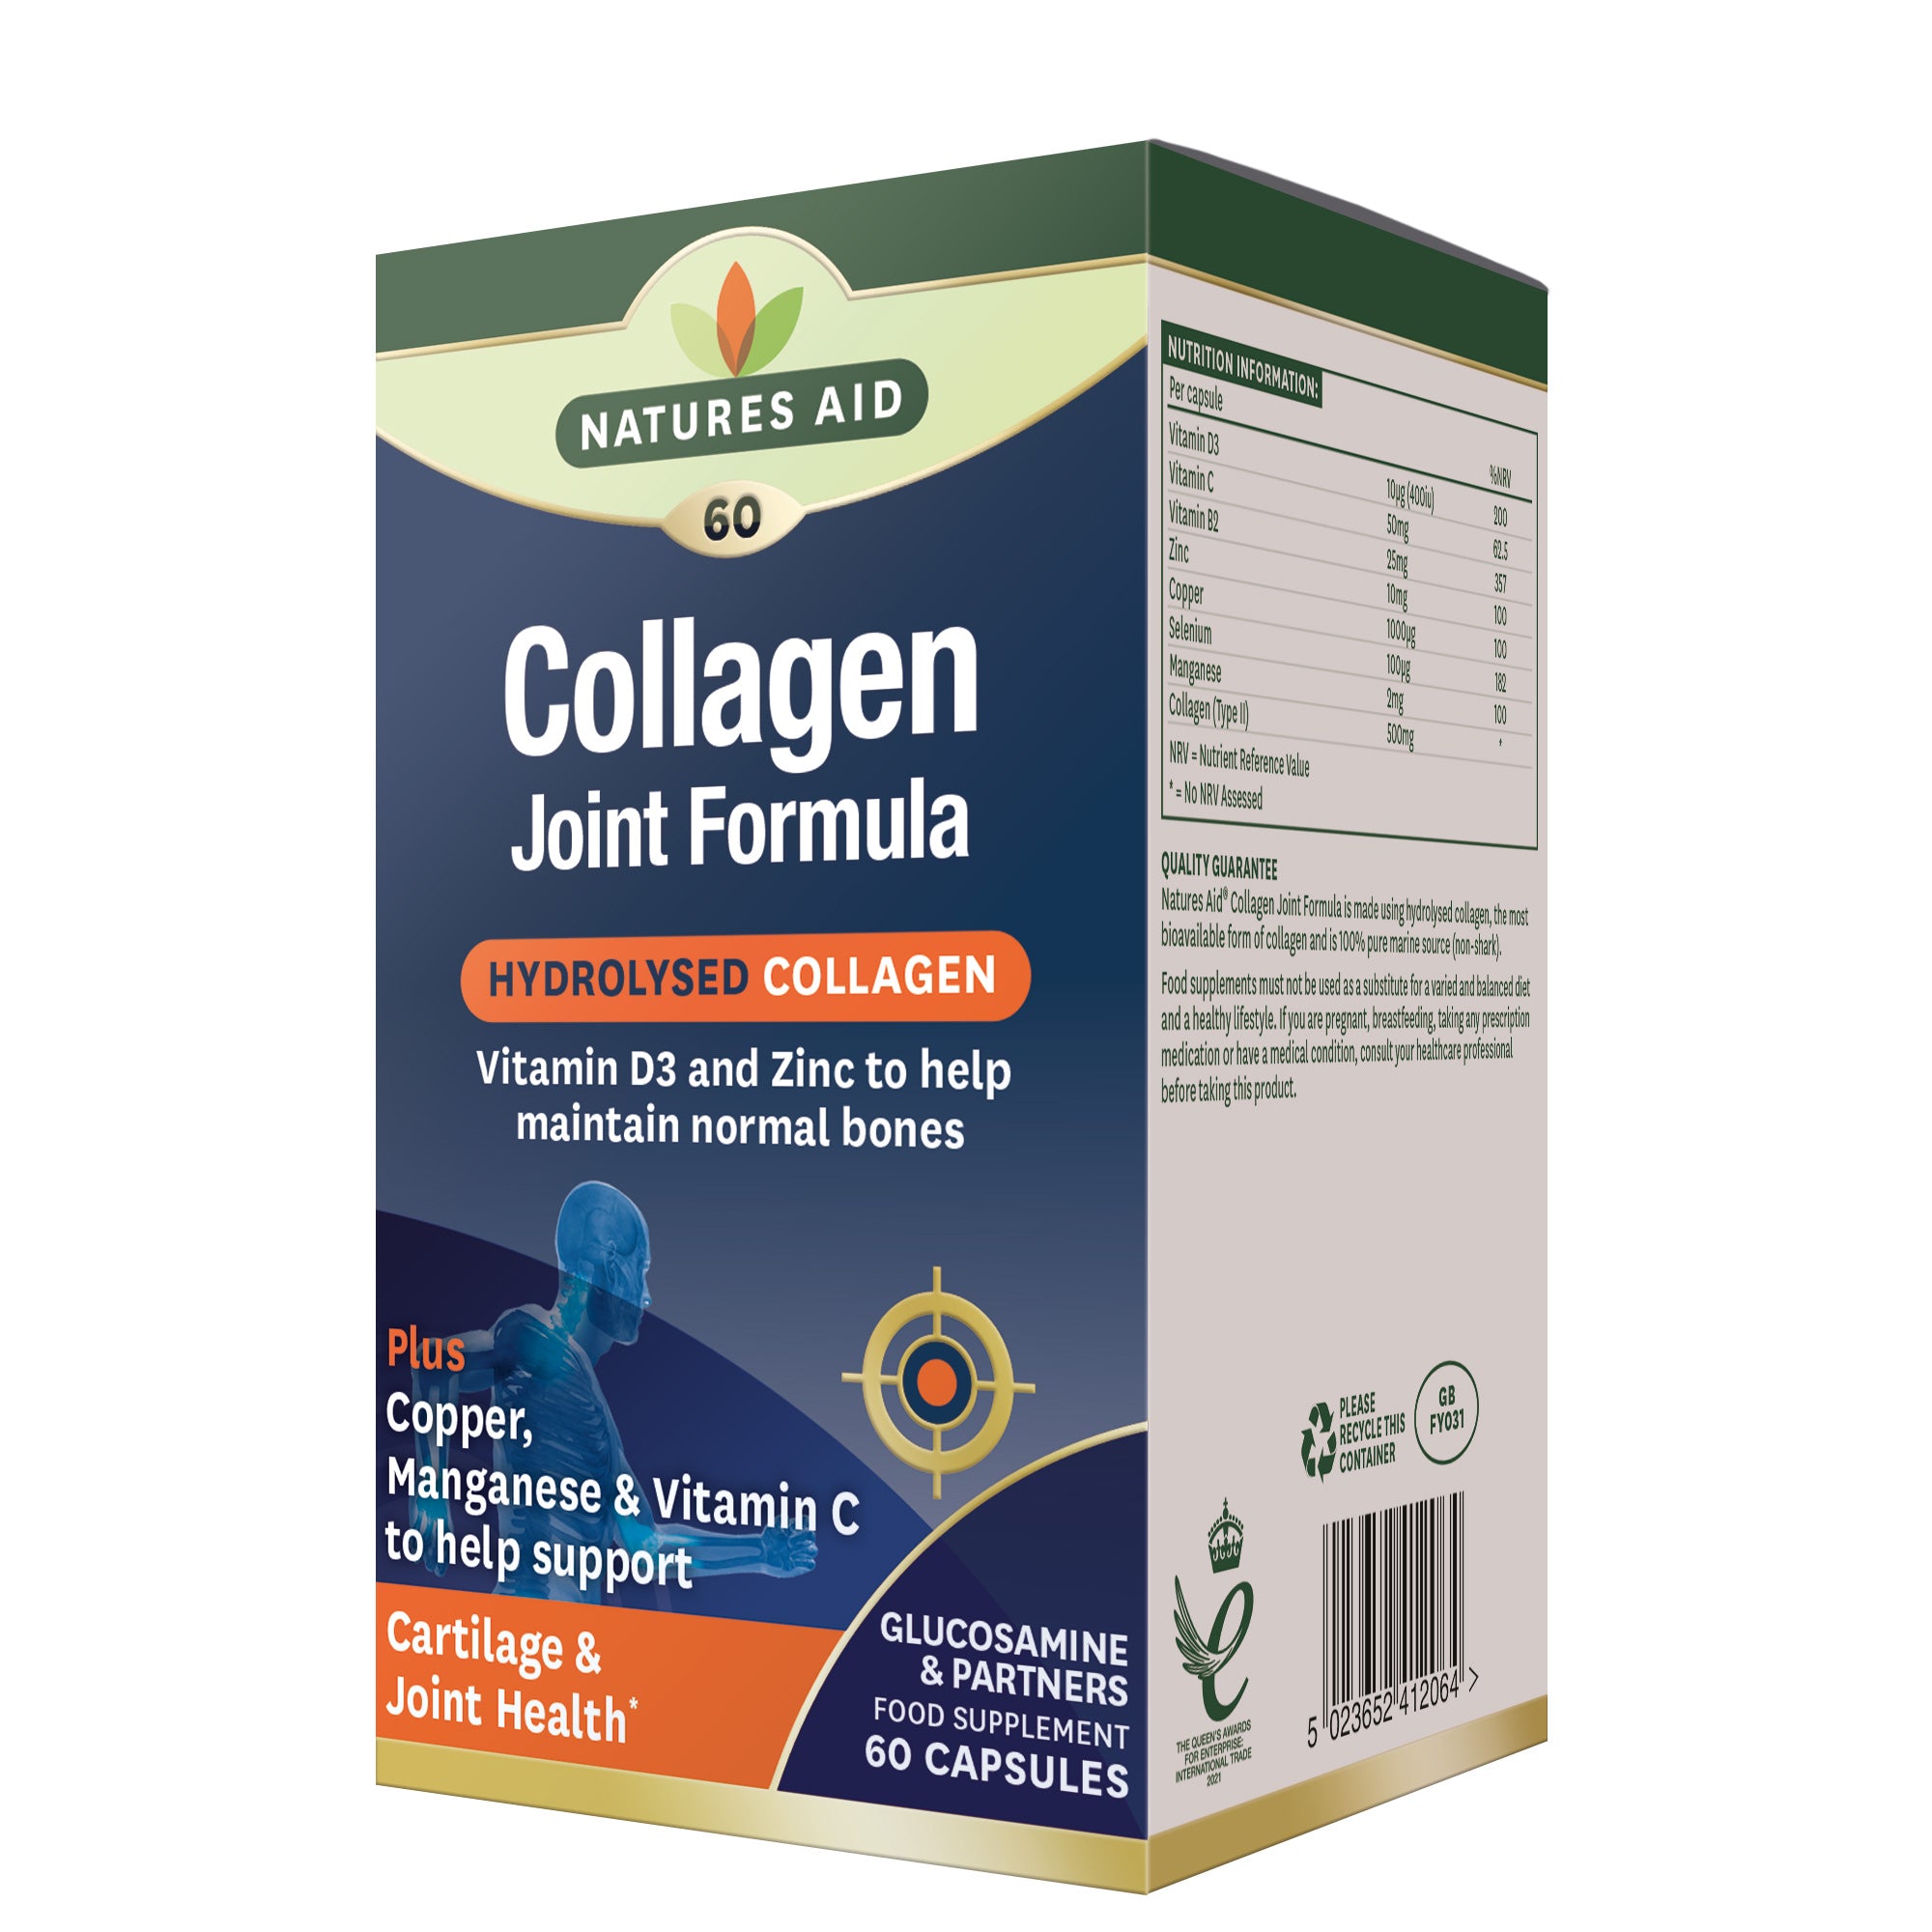 Natures Aid Collagen Joint Formula (60)